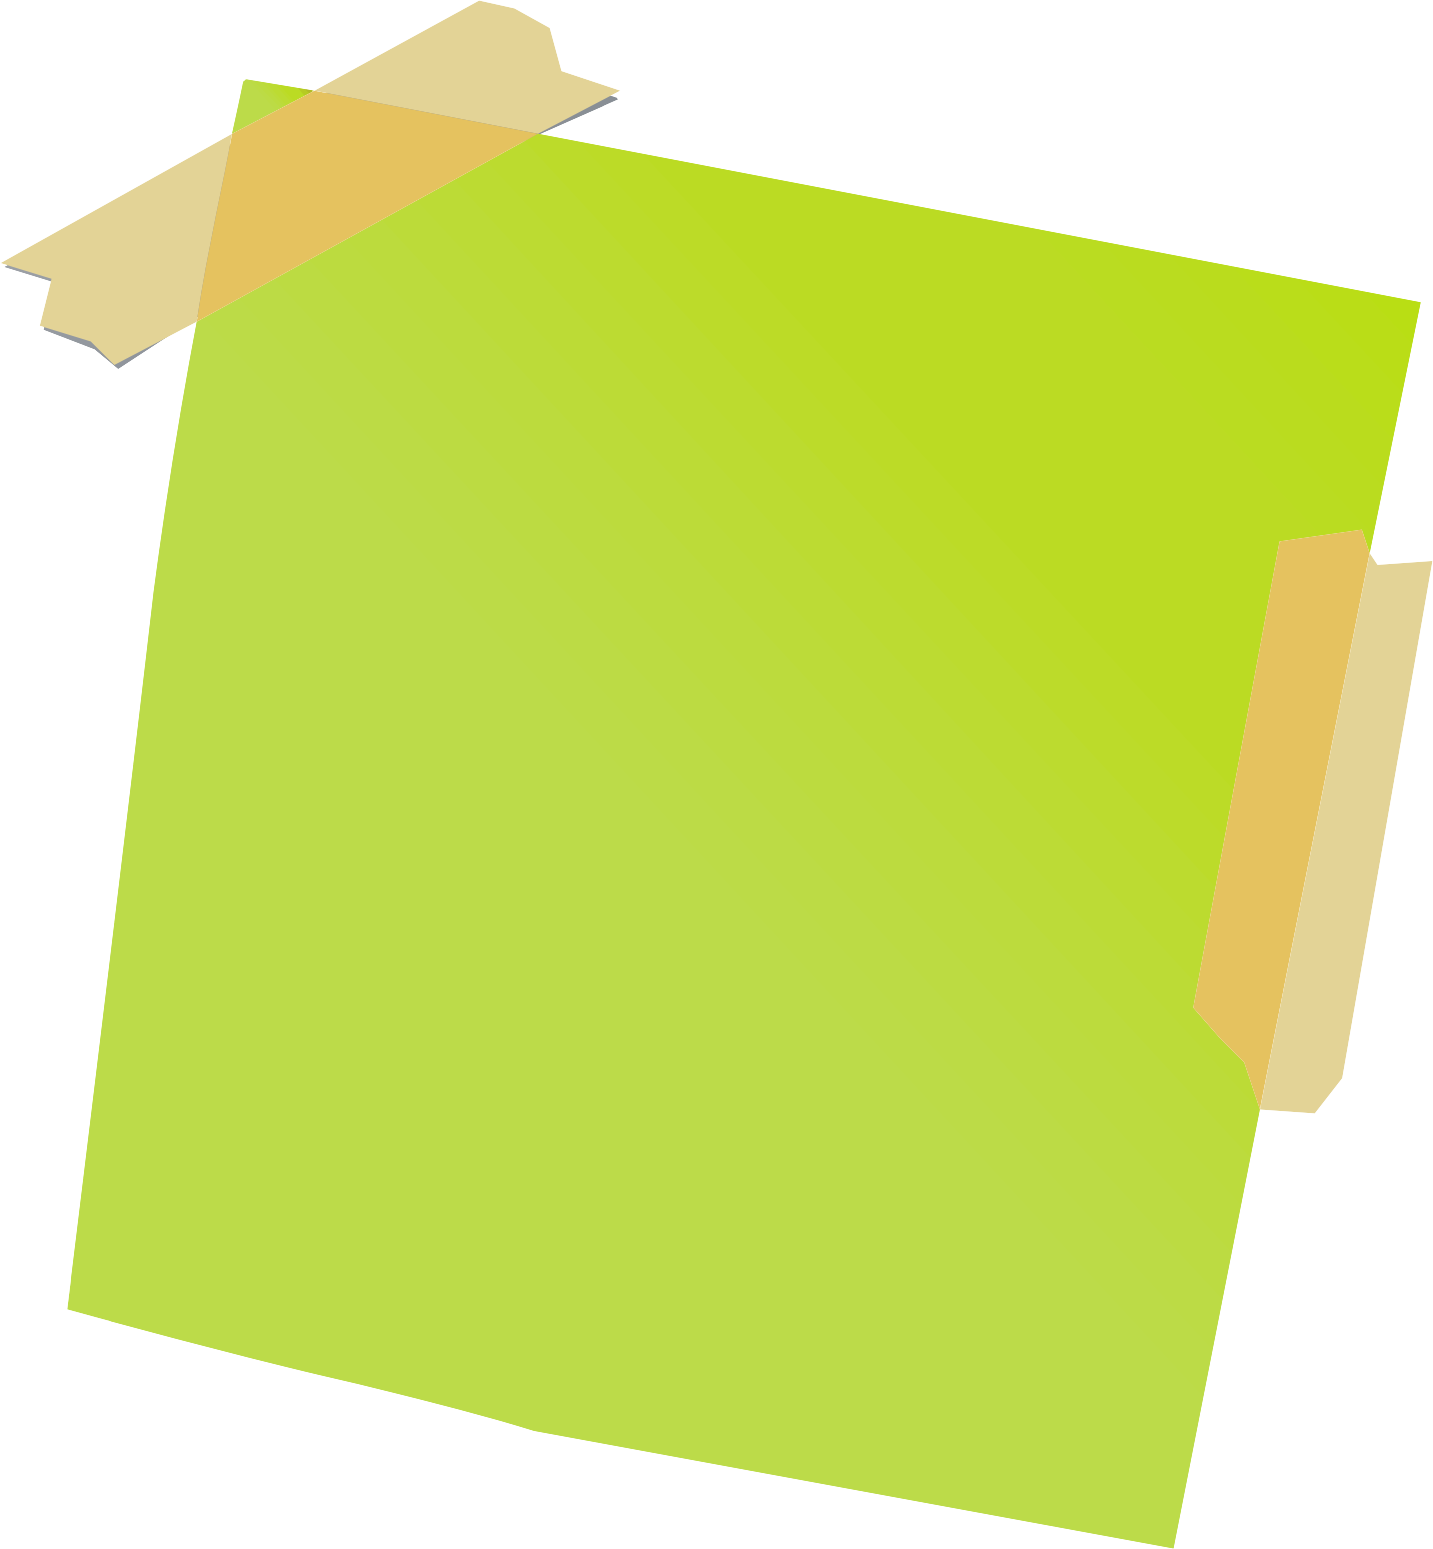 Stickynotes HD PNG - 92481